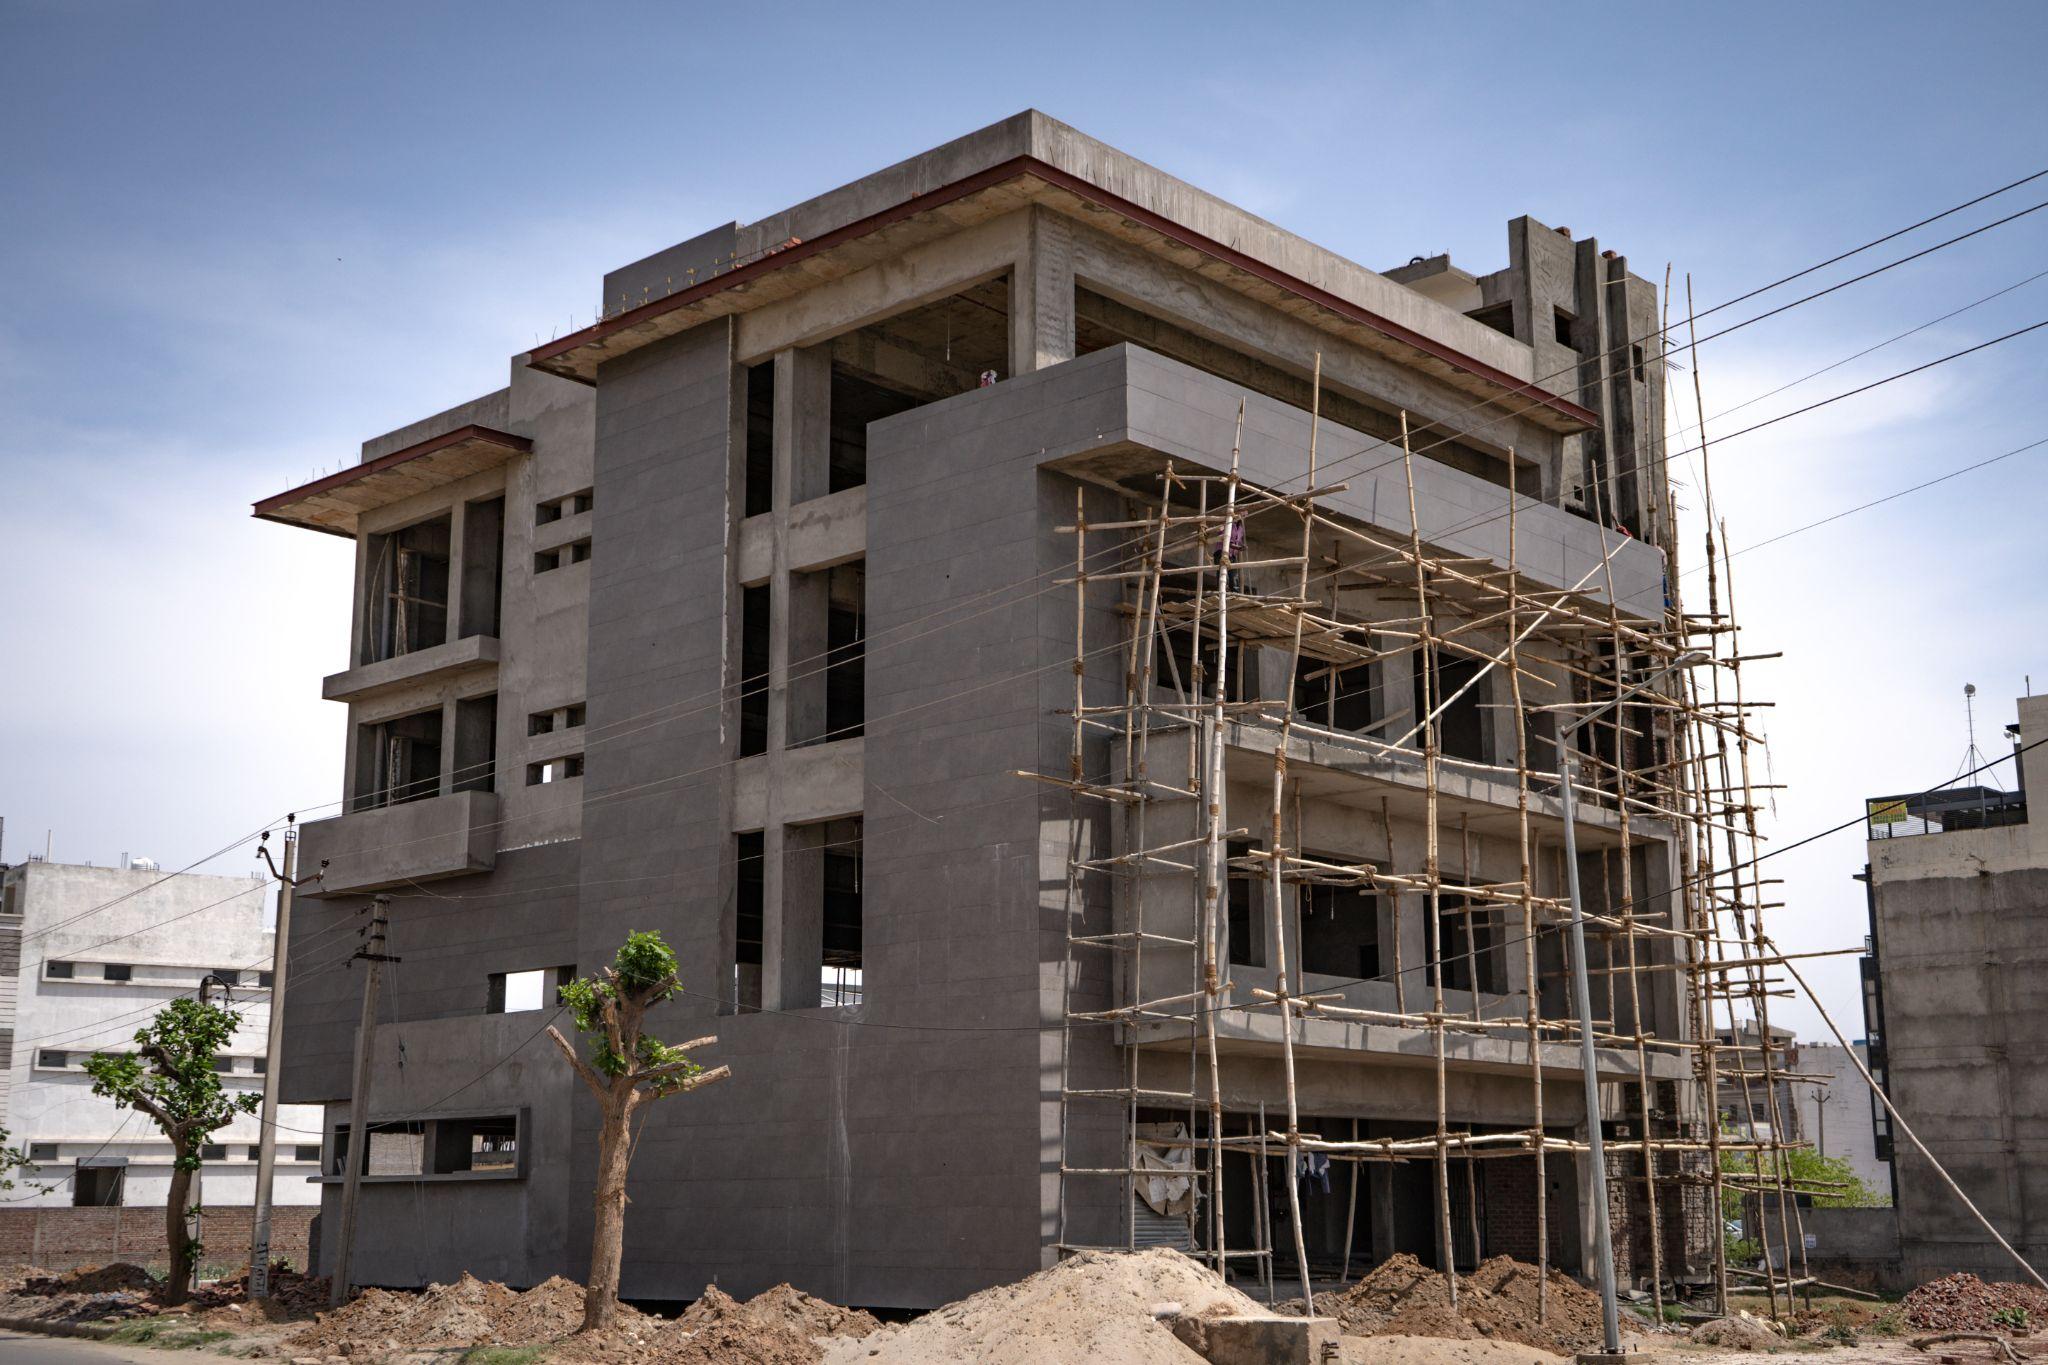 Ground view of a gray 4-story building under construction